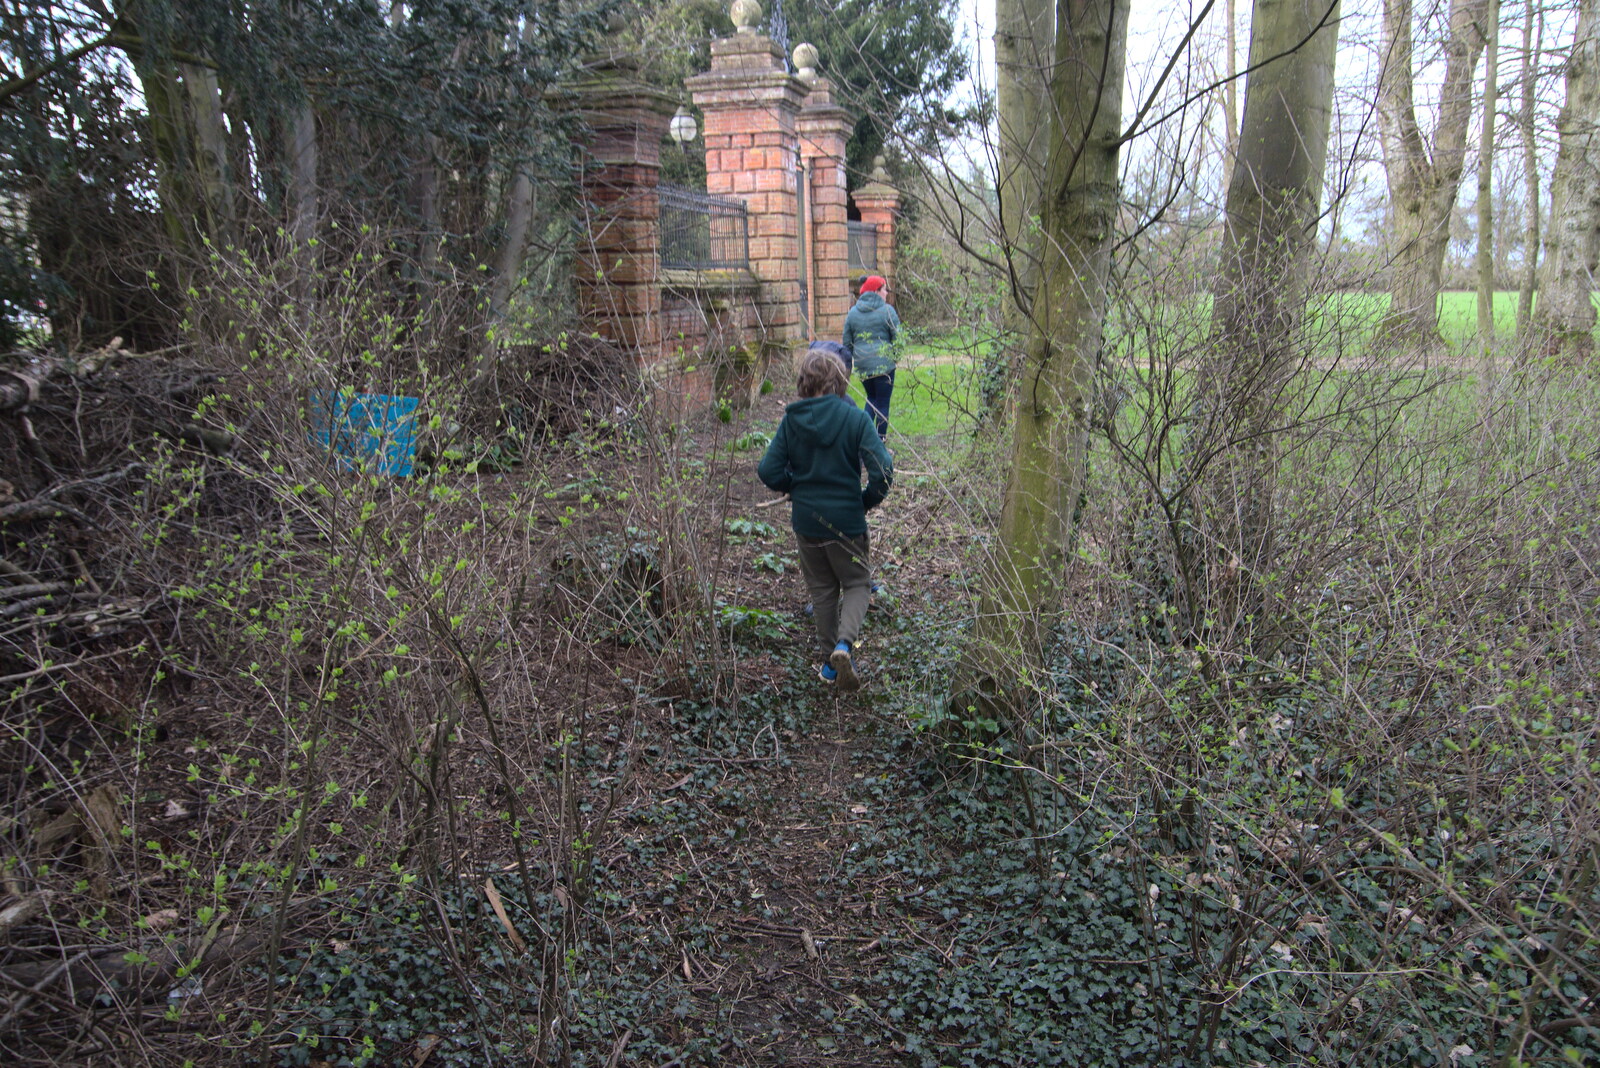 We wander about near the main gate from The Oaksmere: 28 Weeks Later, Brome, Suffolk - 21st March 2021